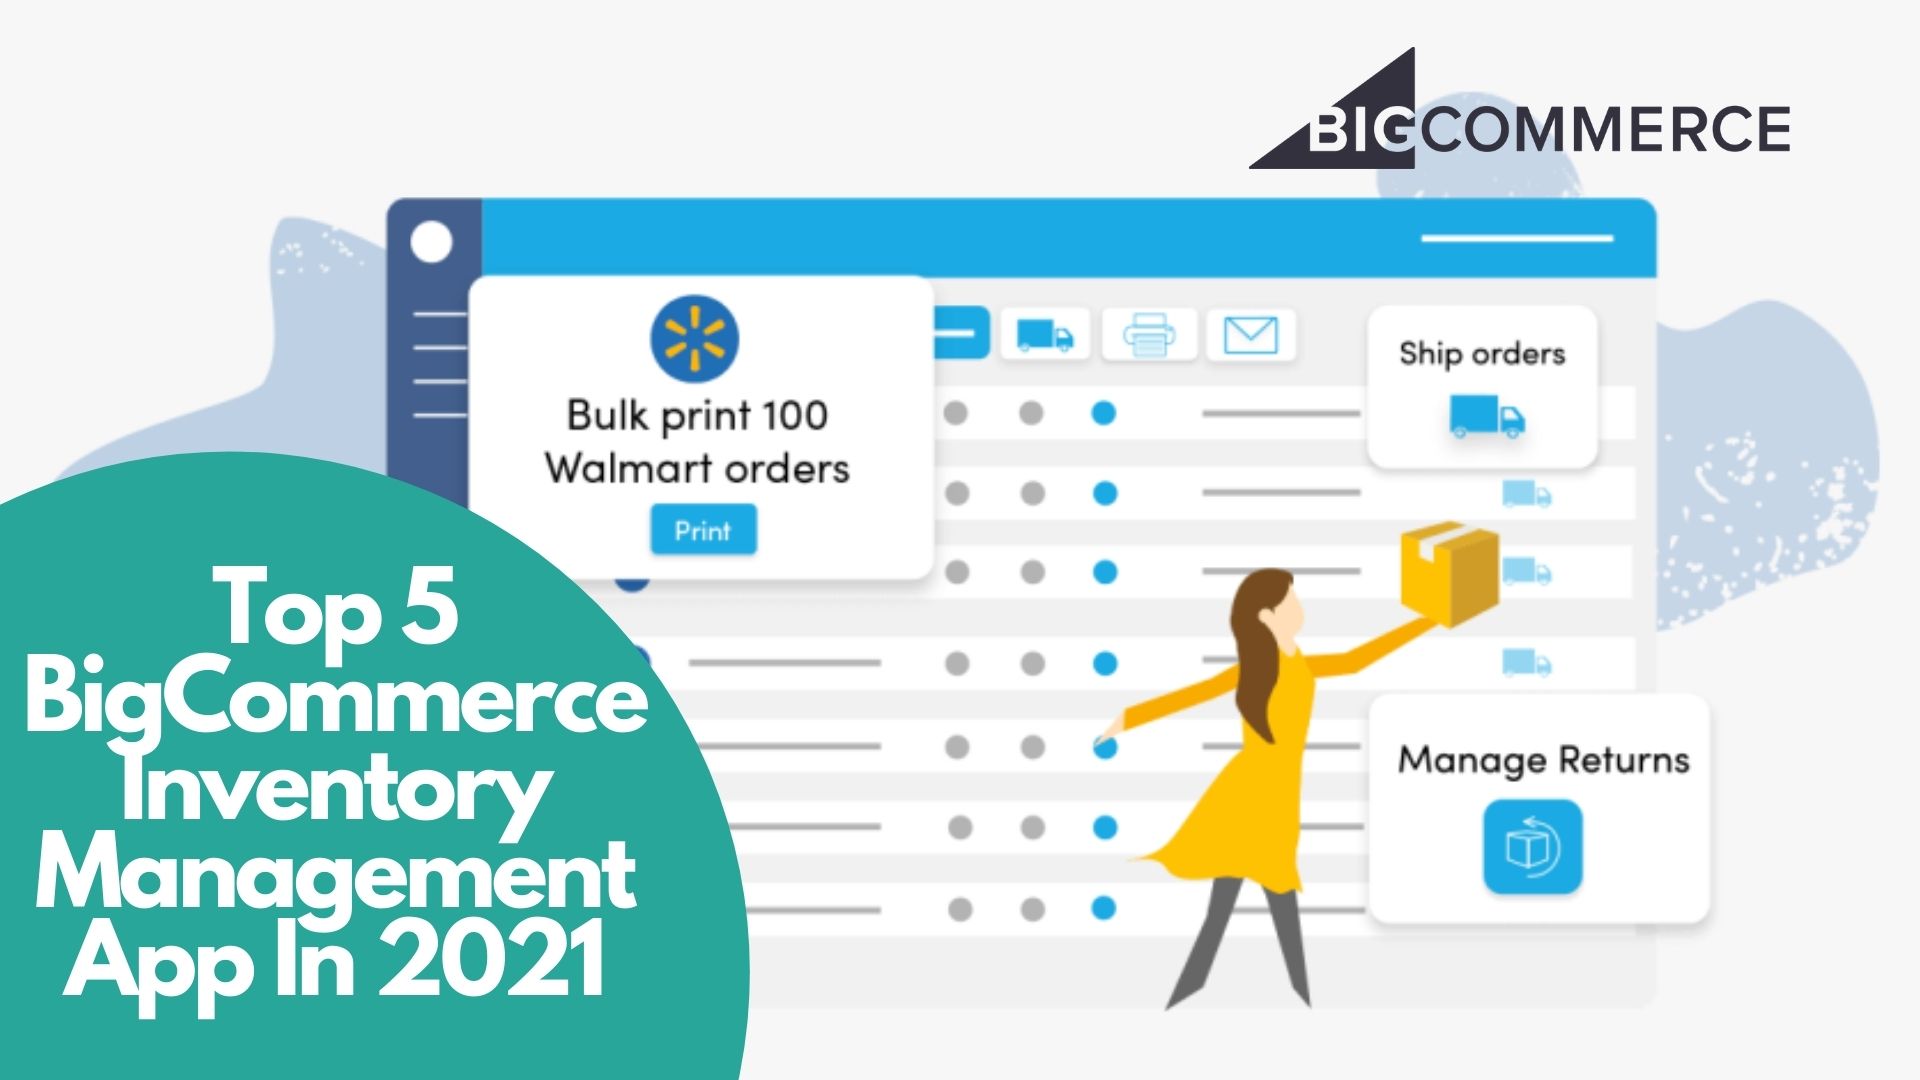 BigCommerce inventory management apps